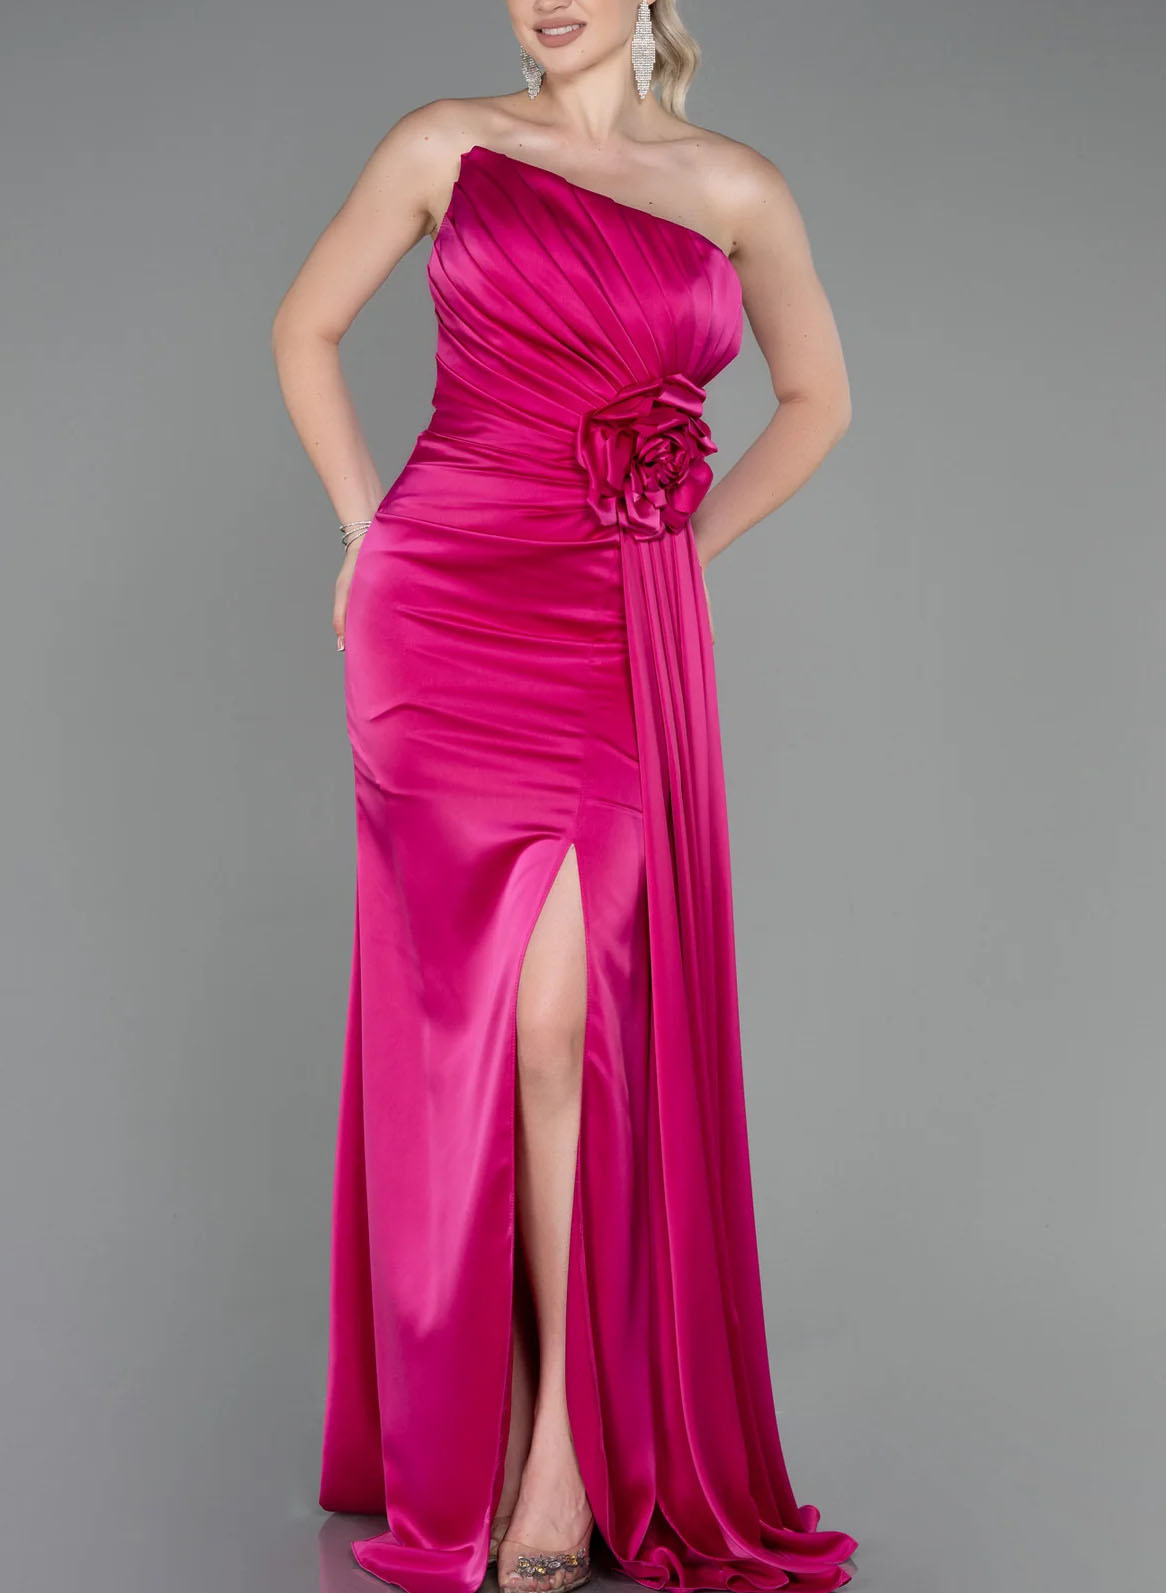 Curvy Strapless  Flower Pleated Mother Of The Bride Dresses With Sheath/Column